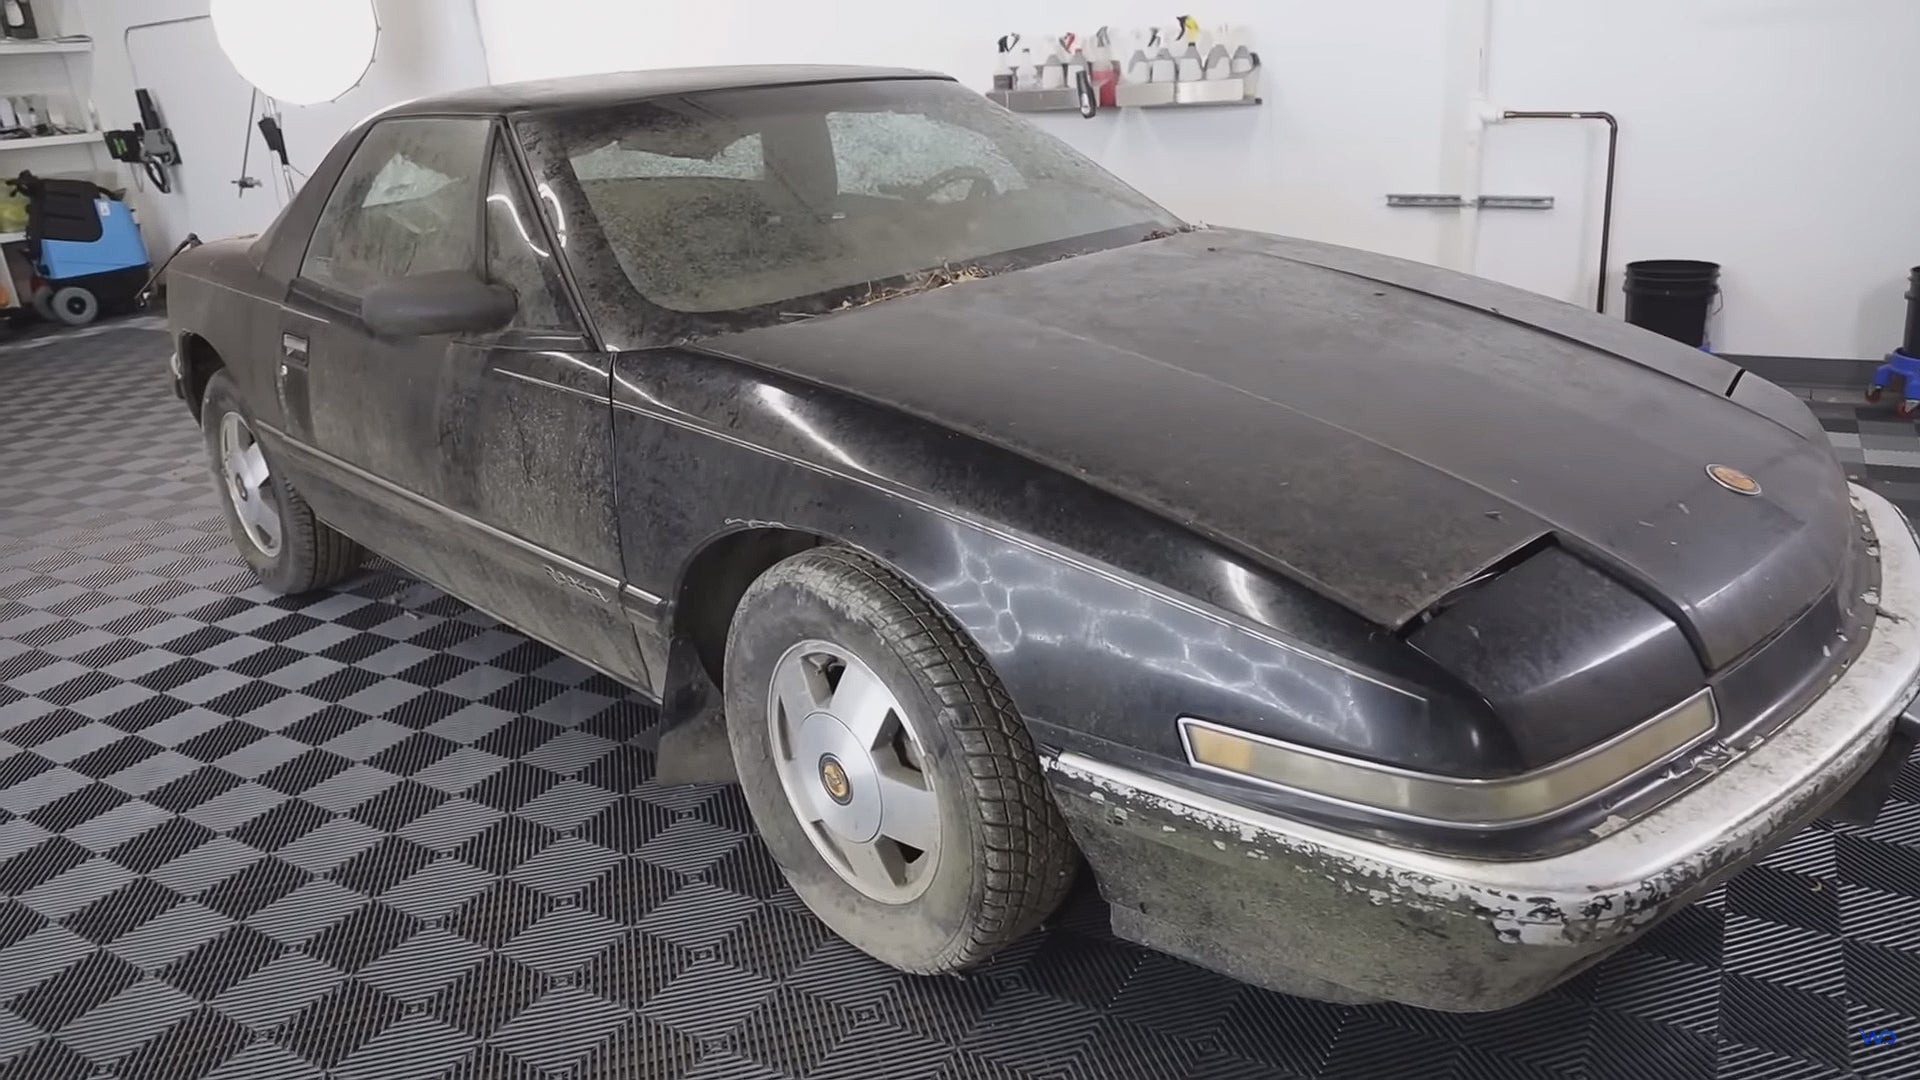 Watch This Abandoned Buick Get Its First Car Wash in 15 Years